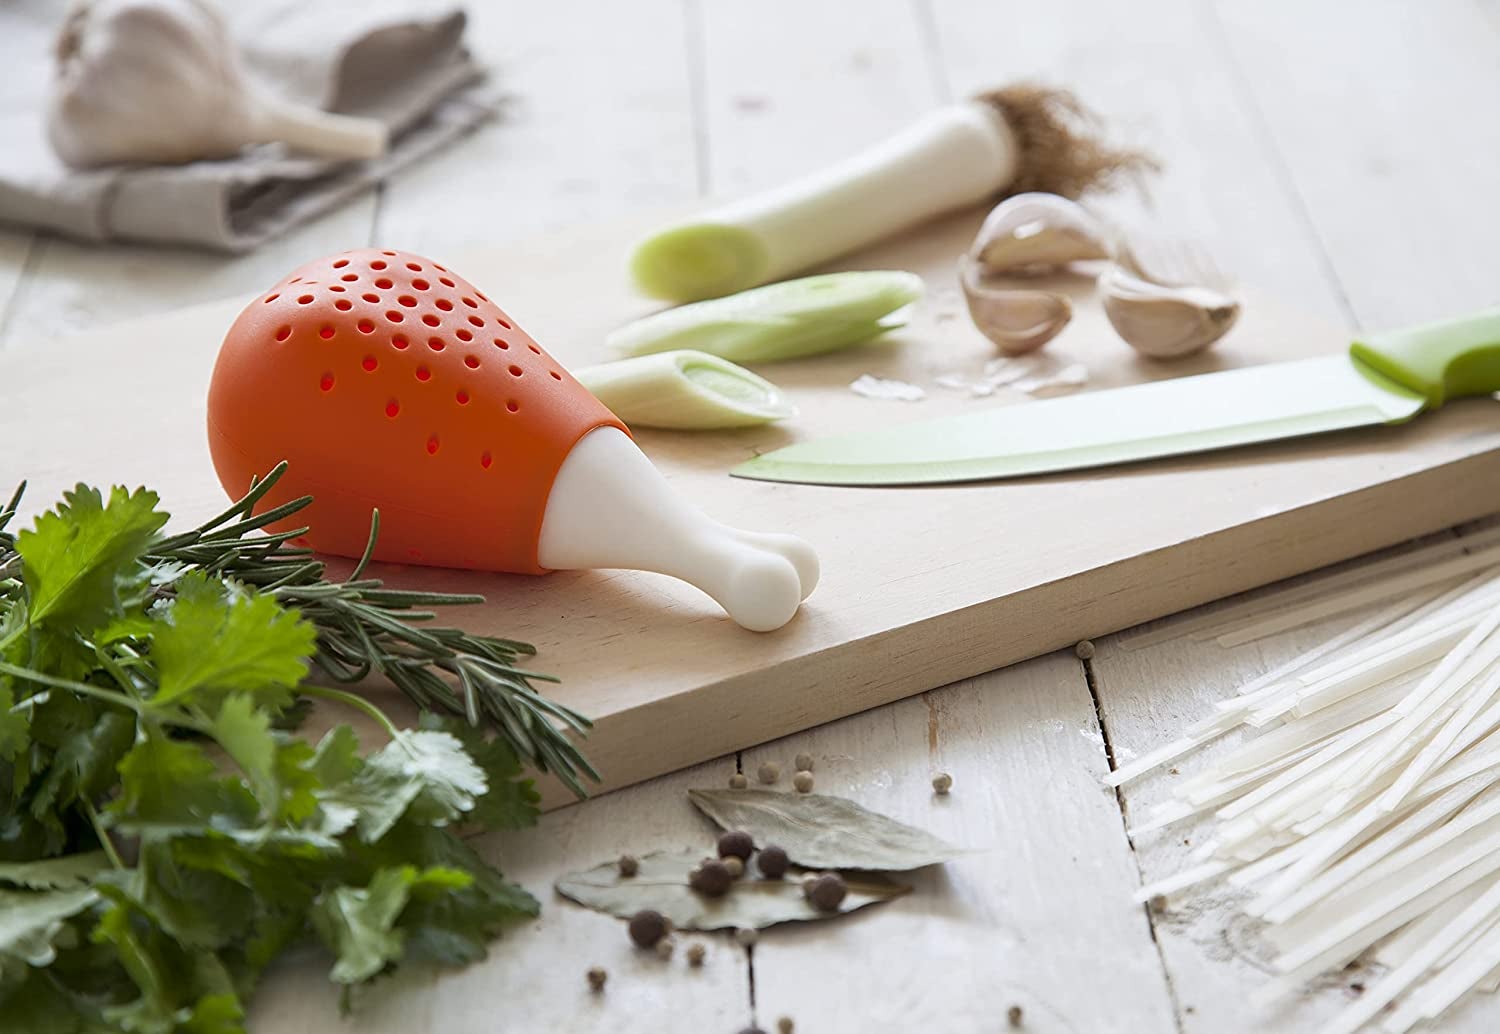 The drumstick-shaped herb infuser 